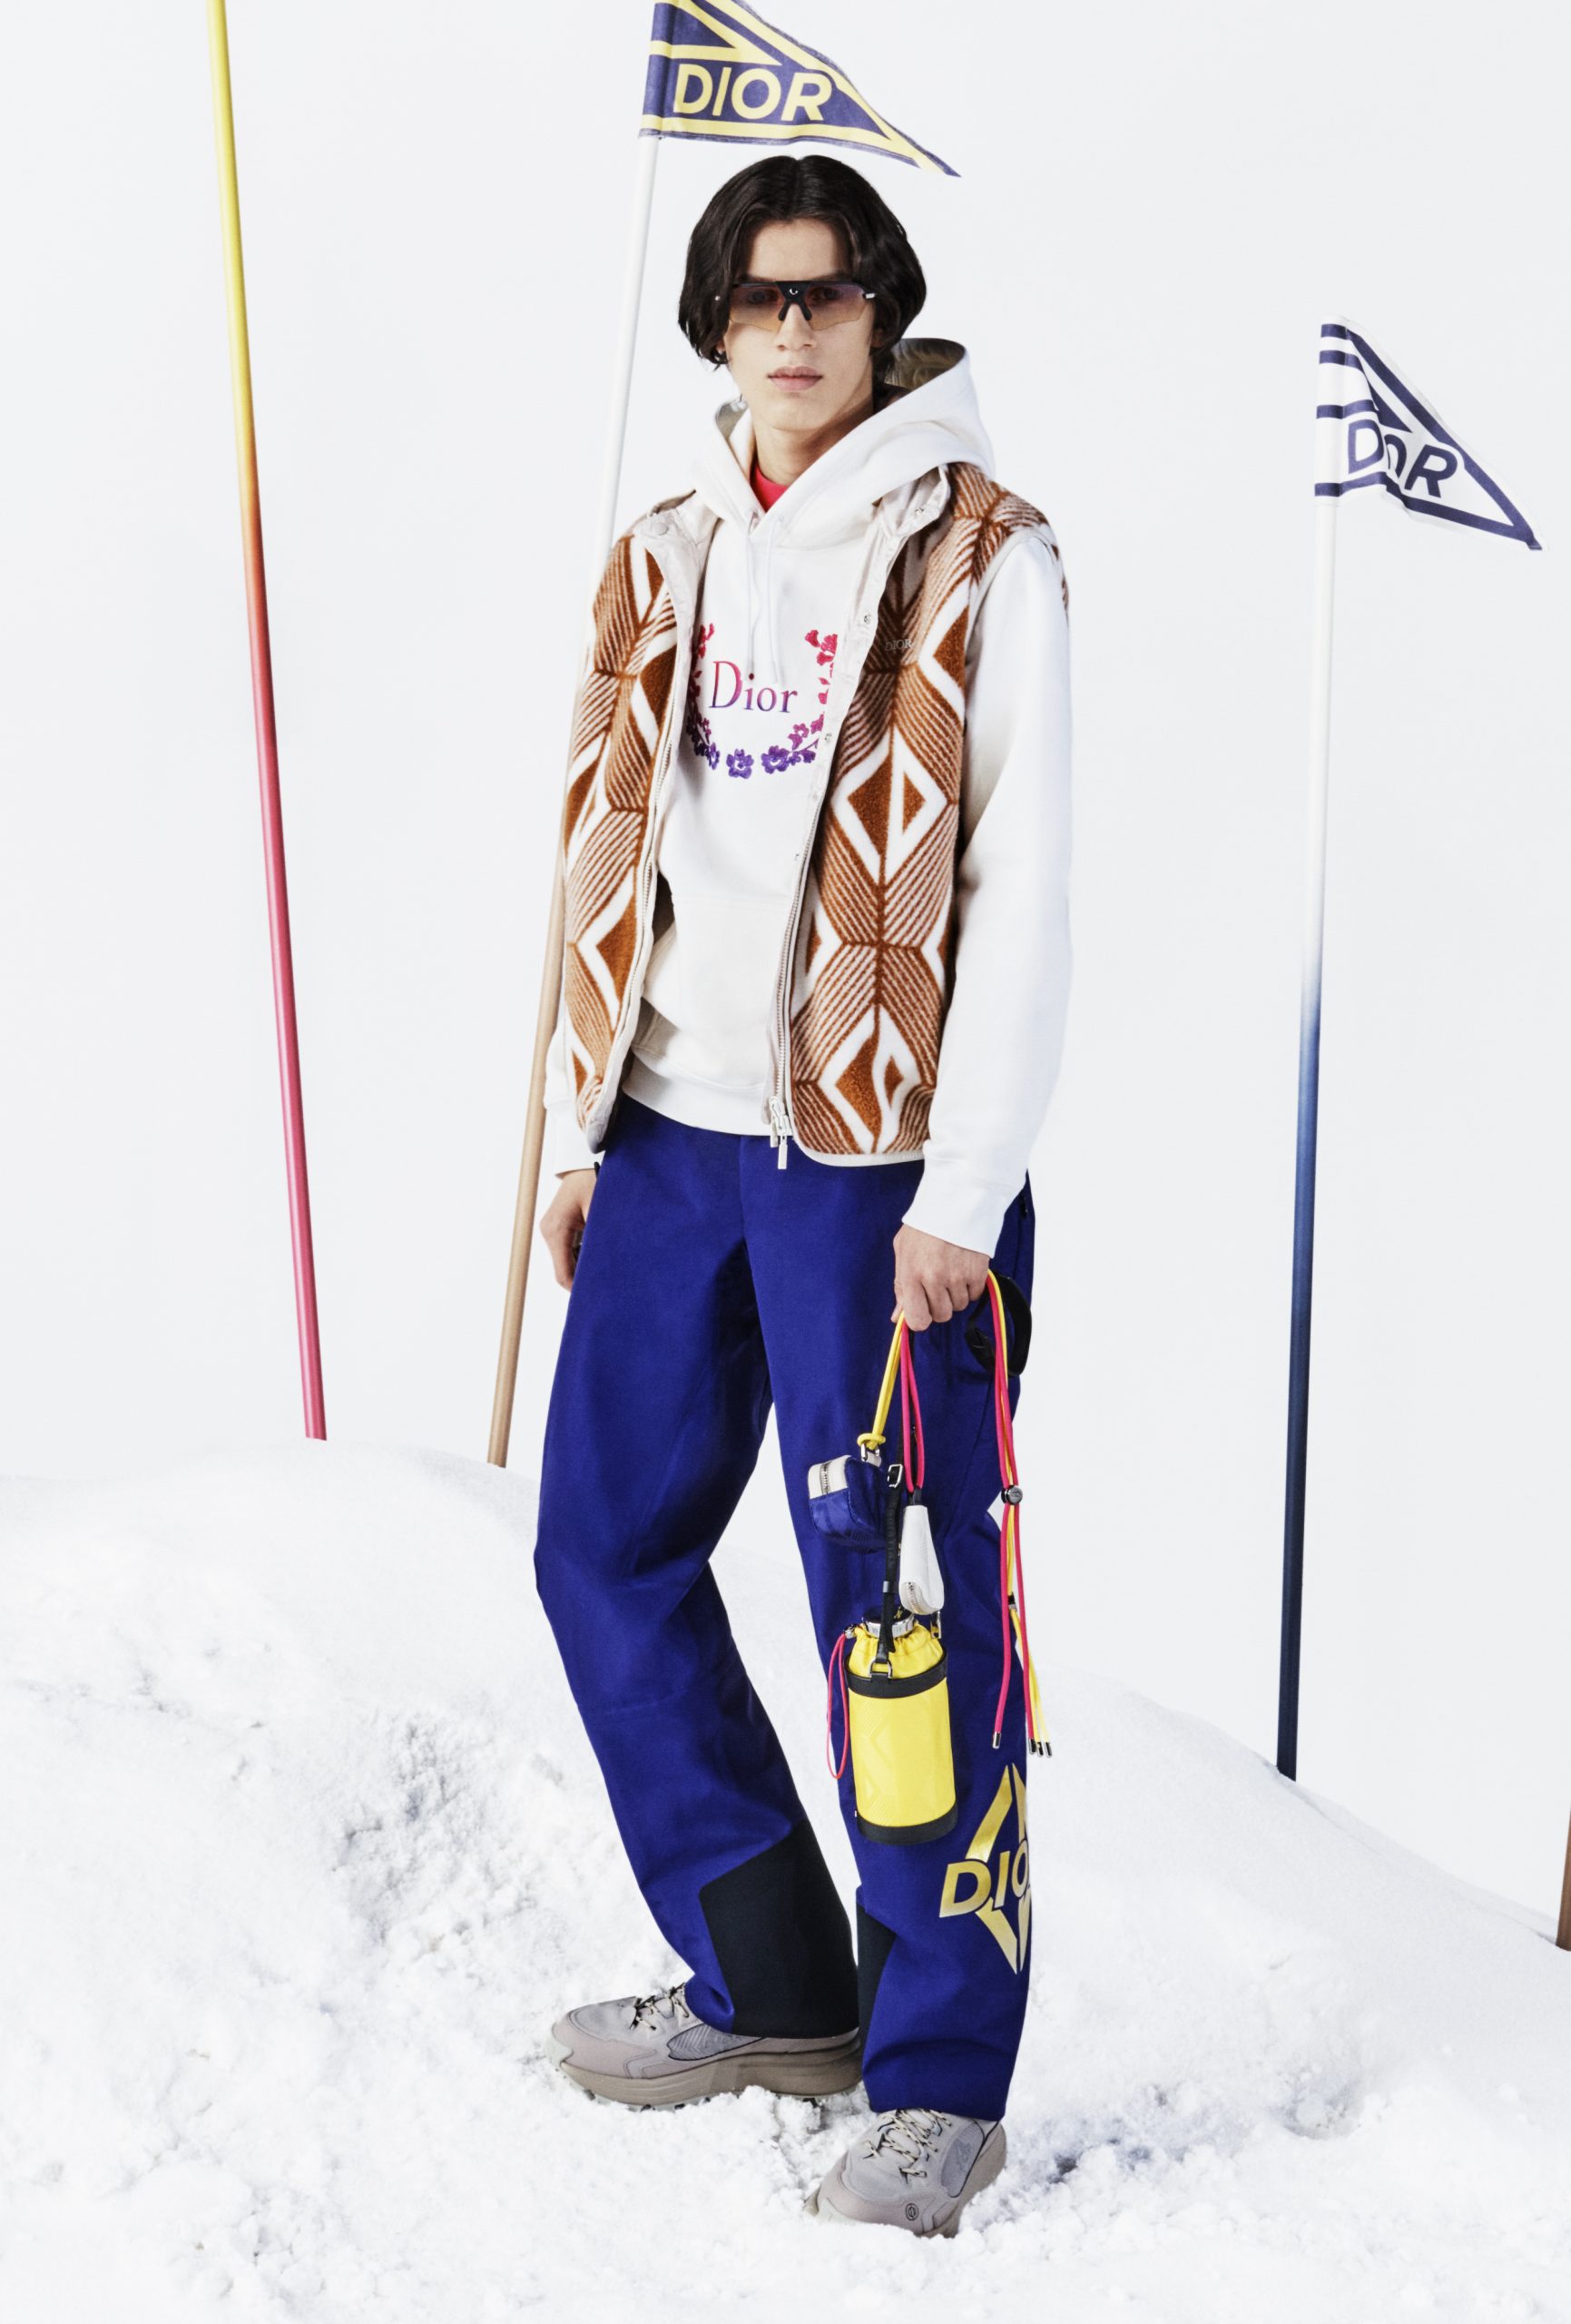 Dior's Spring 2023 Ski Capsule Scales New Heights With Luxury Performance Wear